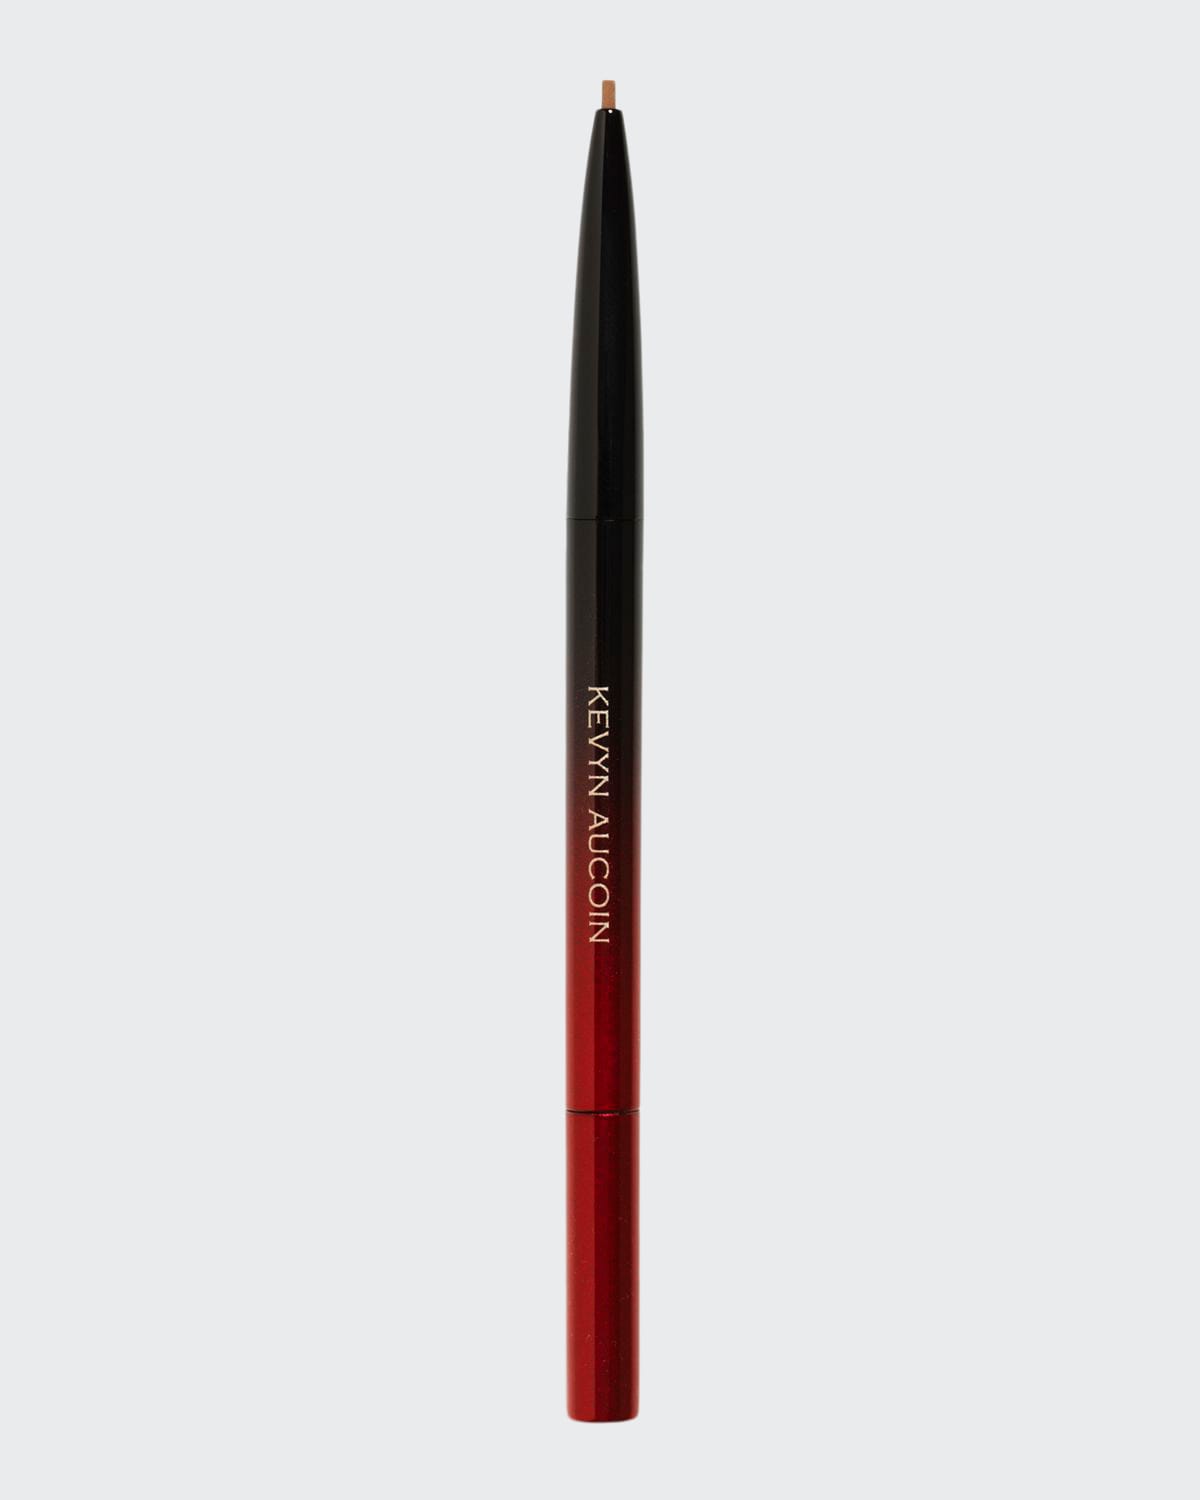 Kevyn Aucoin The Precision Brow Pencil In Brunette